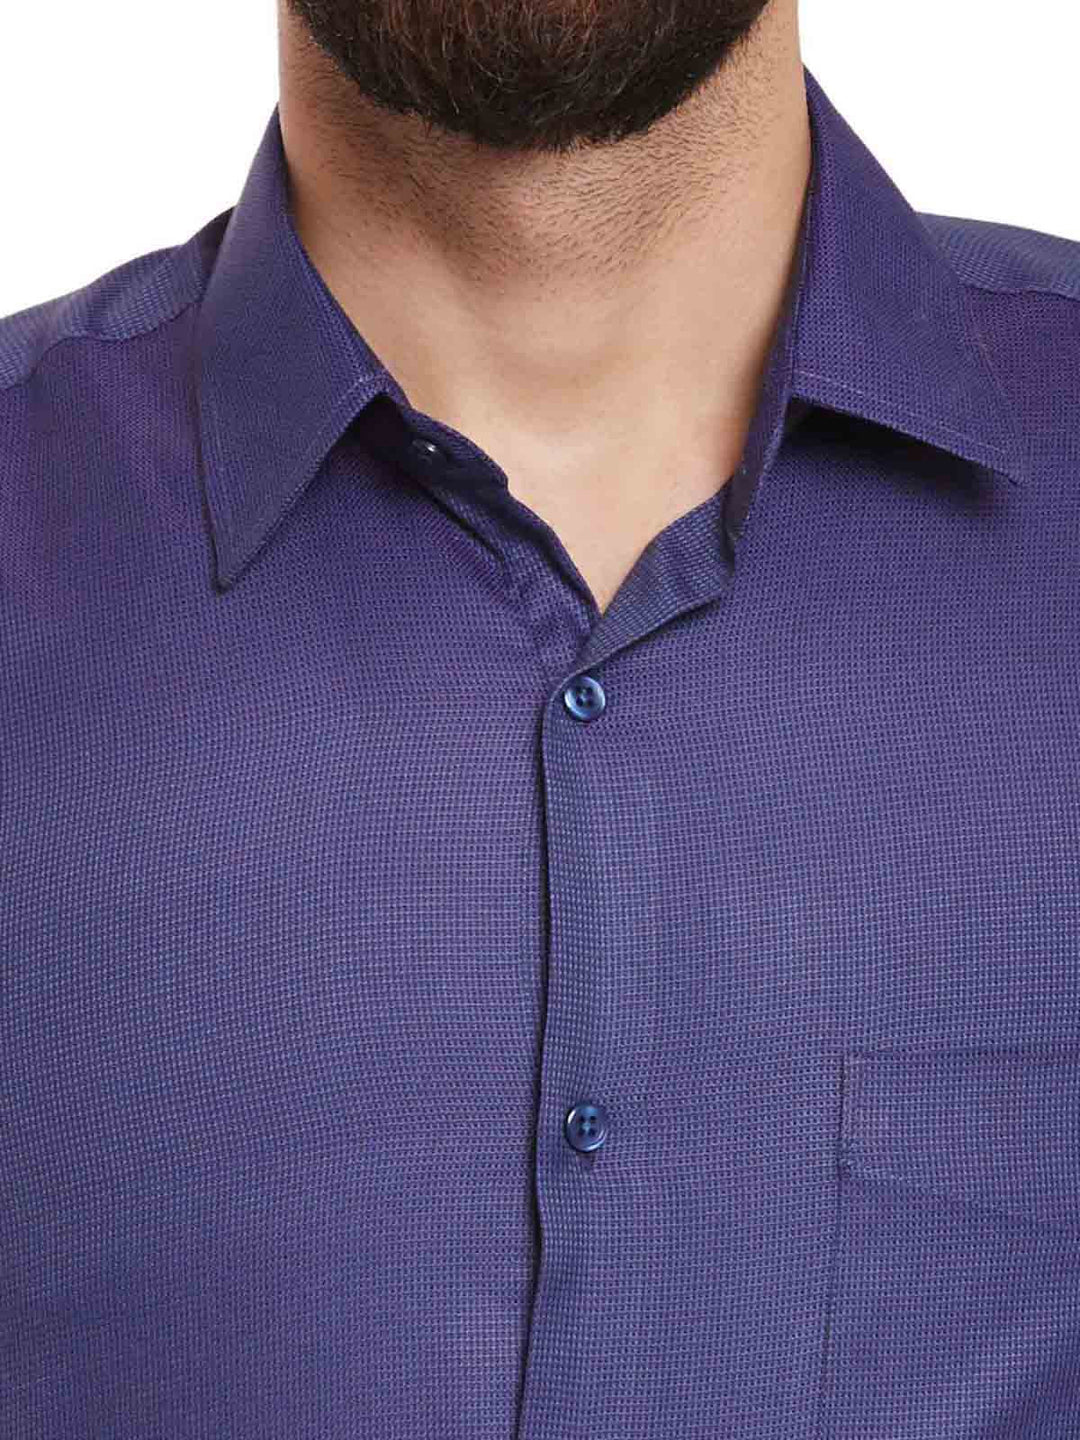 Men Navy and Purple Solid Slim Fit Formal Shirt